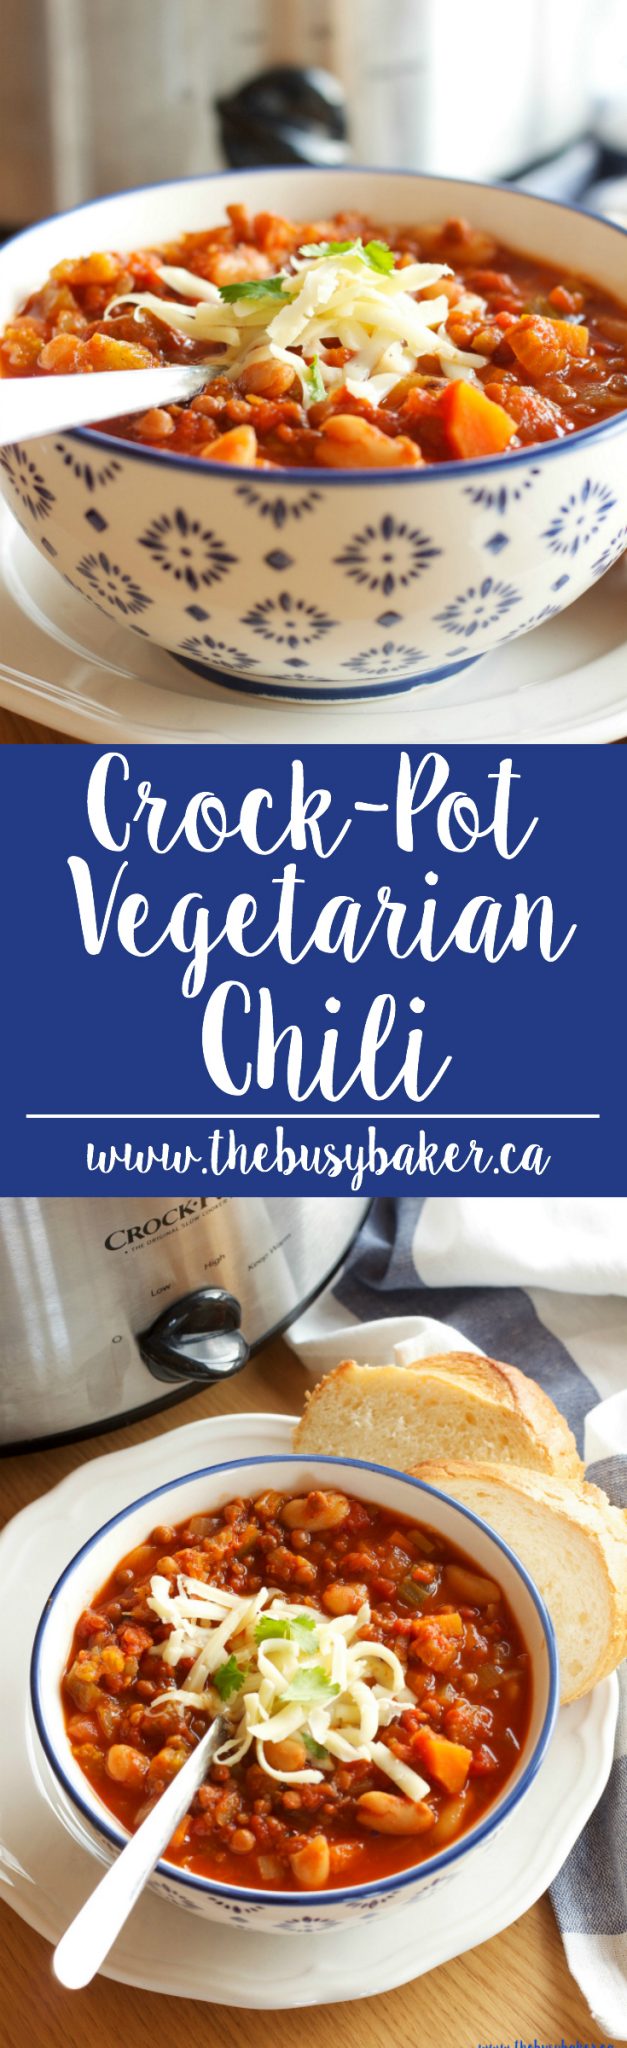 This Crock Pot Vegetarian Chili is a staple recipe in our family! It’s a super easy healthy chili recipe – just dump all the ingredients in your slow cooker, set it and forget it, and in a few hours you’ll have a delicious meal to warm you up from the inside out! Recipe from www.thebusybaker.ca #vegetarian #chili #winter #soup #stew #crock-pot #homemade via @busybakerblog